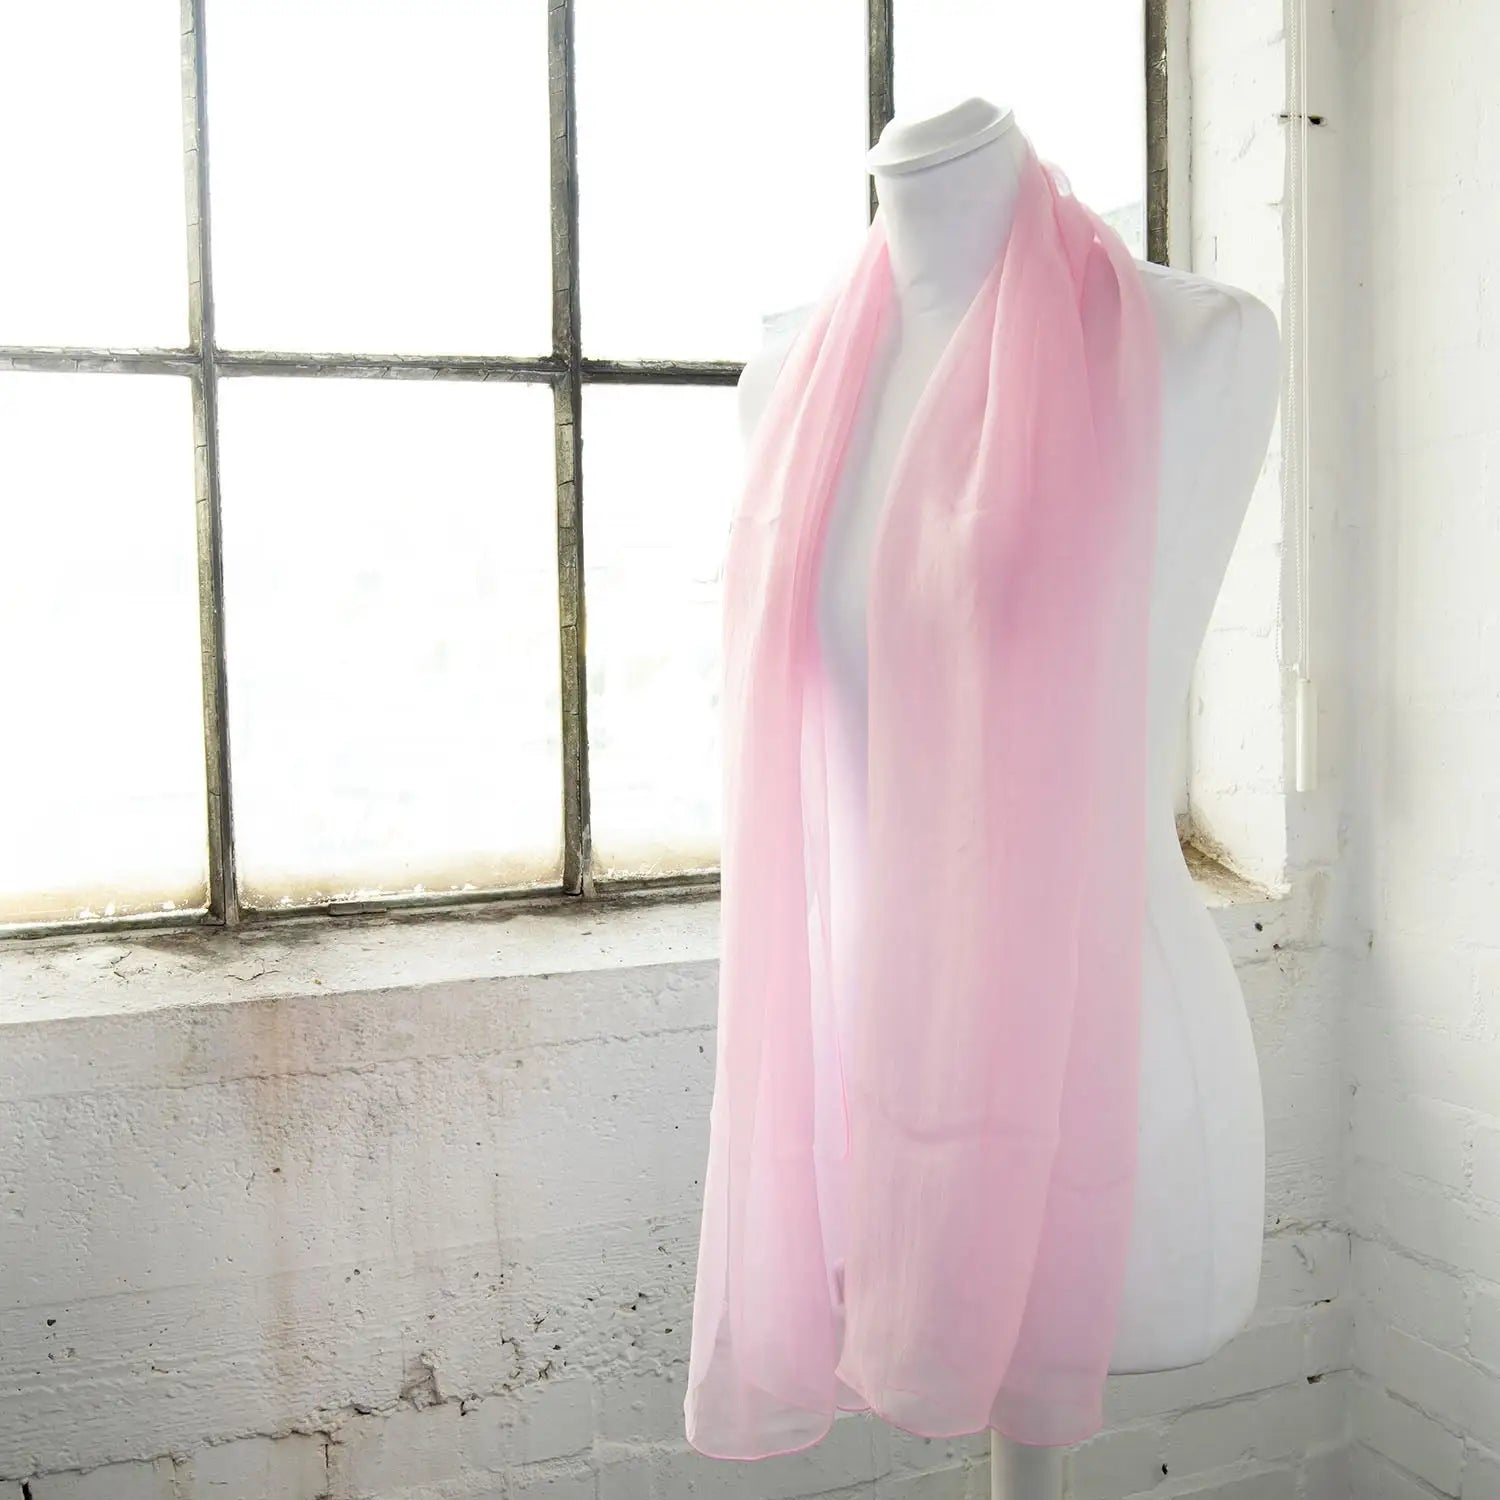 a pink scarf on a manne in front of a window